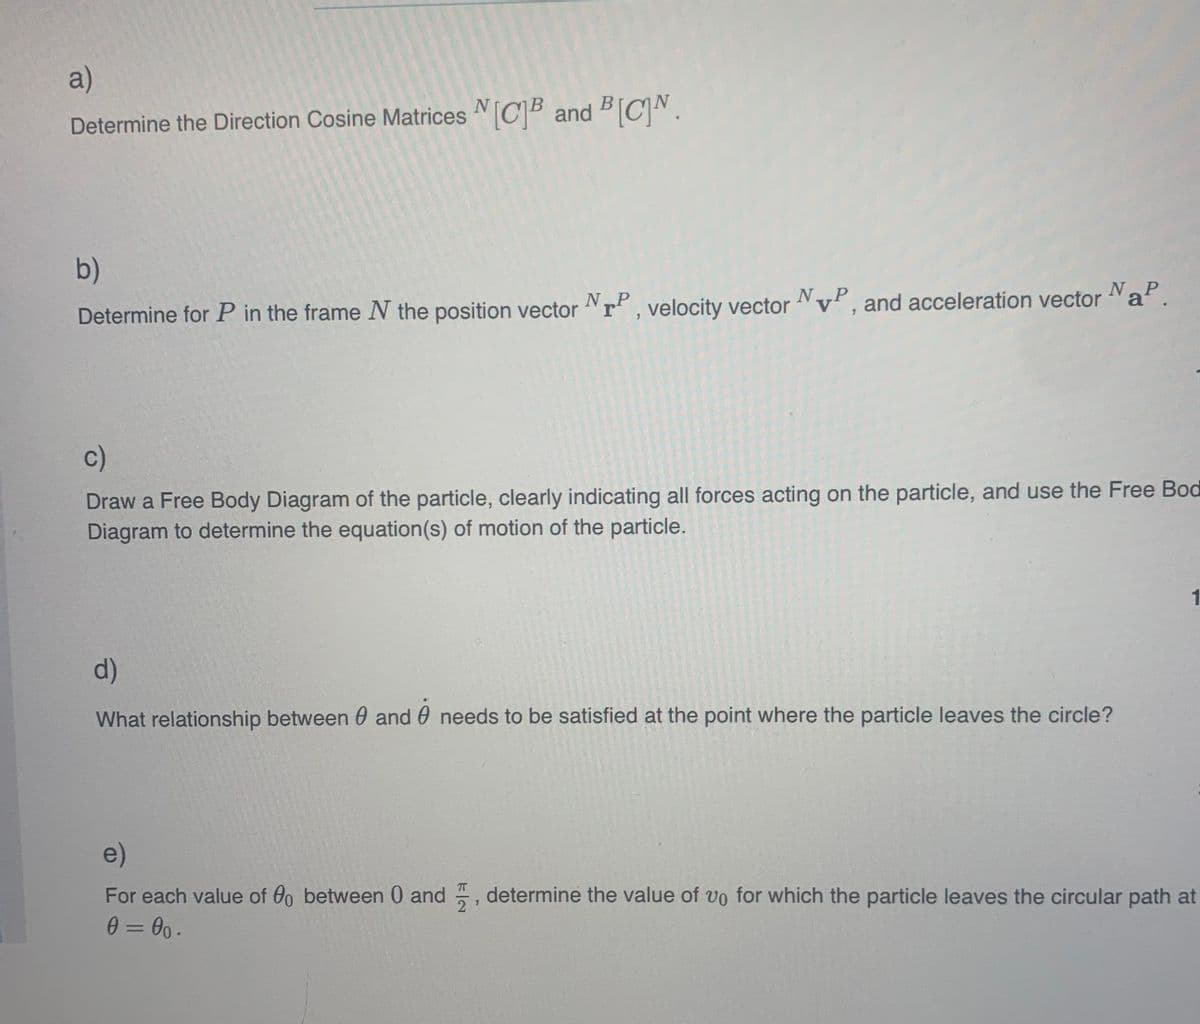 a)
Determine the Direction Cosine Matrices [C]B and BCN.
b)
Determine for P in the frame N the position vector NTP, velocity vector NP, and acceleration vector NaP.
c)
Draw a Free Body Diagram of the particle, clearly indicating all forces acting on the particle, and use the Free Bod
Diagram to determine the equation(s) of motion of the particle.
d)
What relationship between 0 and needs to be satisfied at the point where the particle leaves the circle?
1
e)
For each value of 00 between 0 and determine the value of vo for which the particle leaves the circular path at
0=00.
7